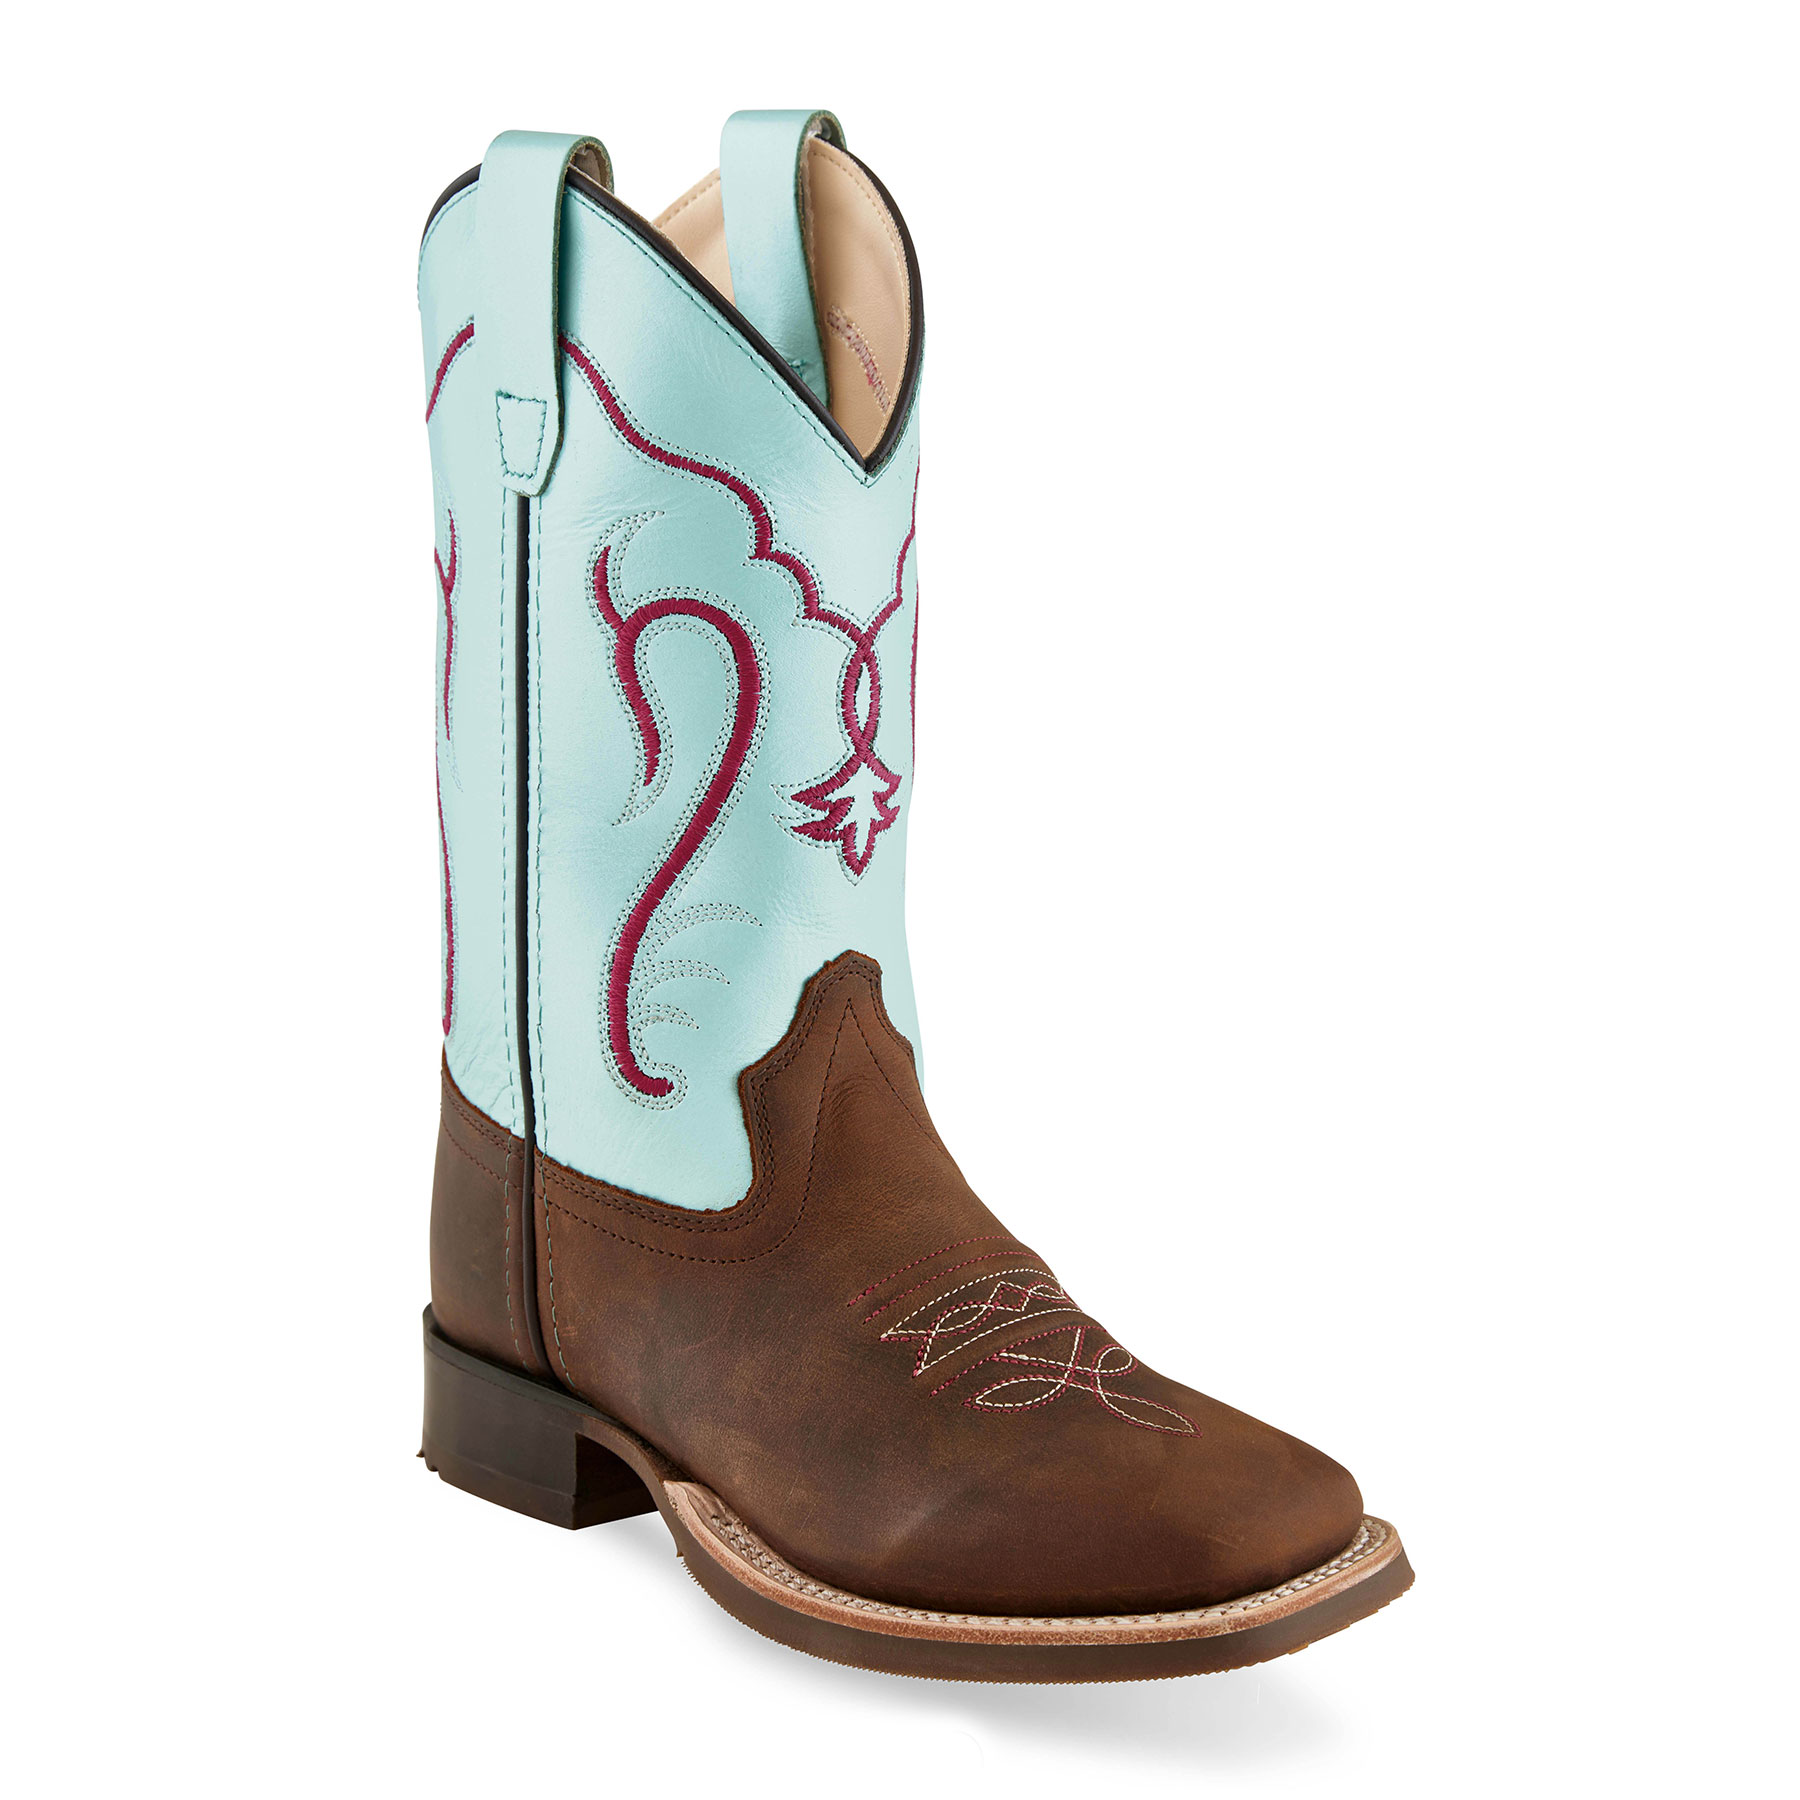 Pungo Ridge - Old West Youth's Square Toe Boots - Brown/Silver Light ...